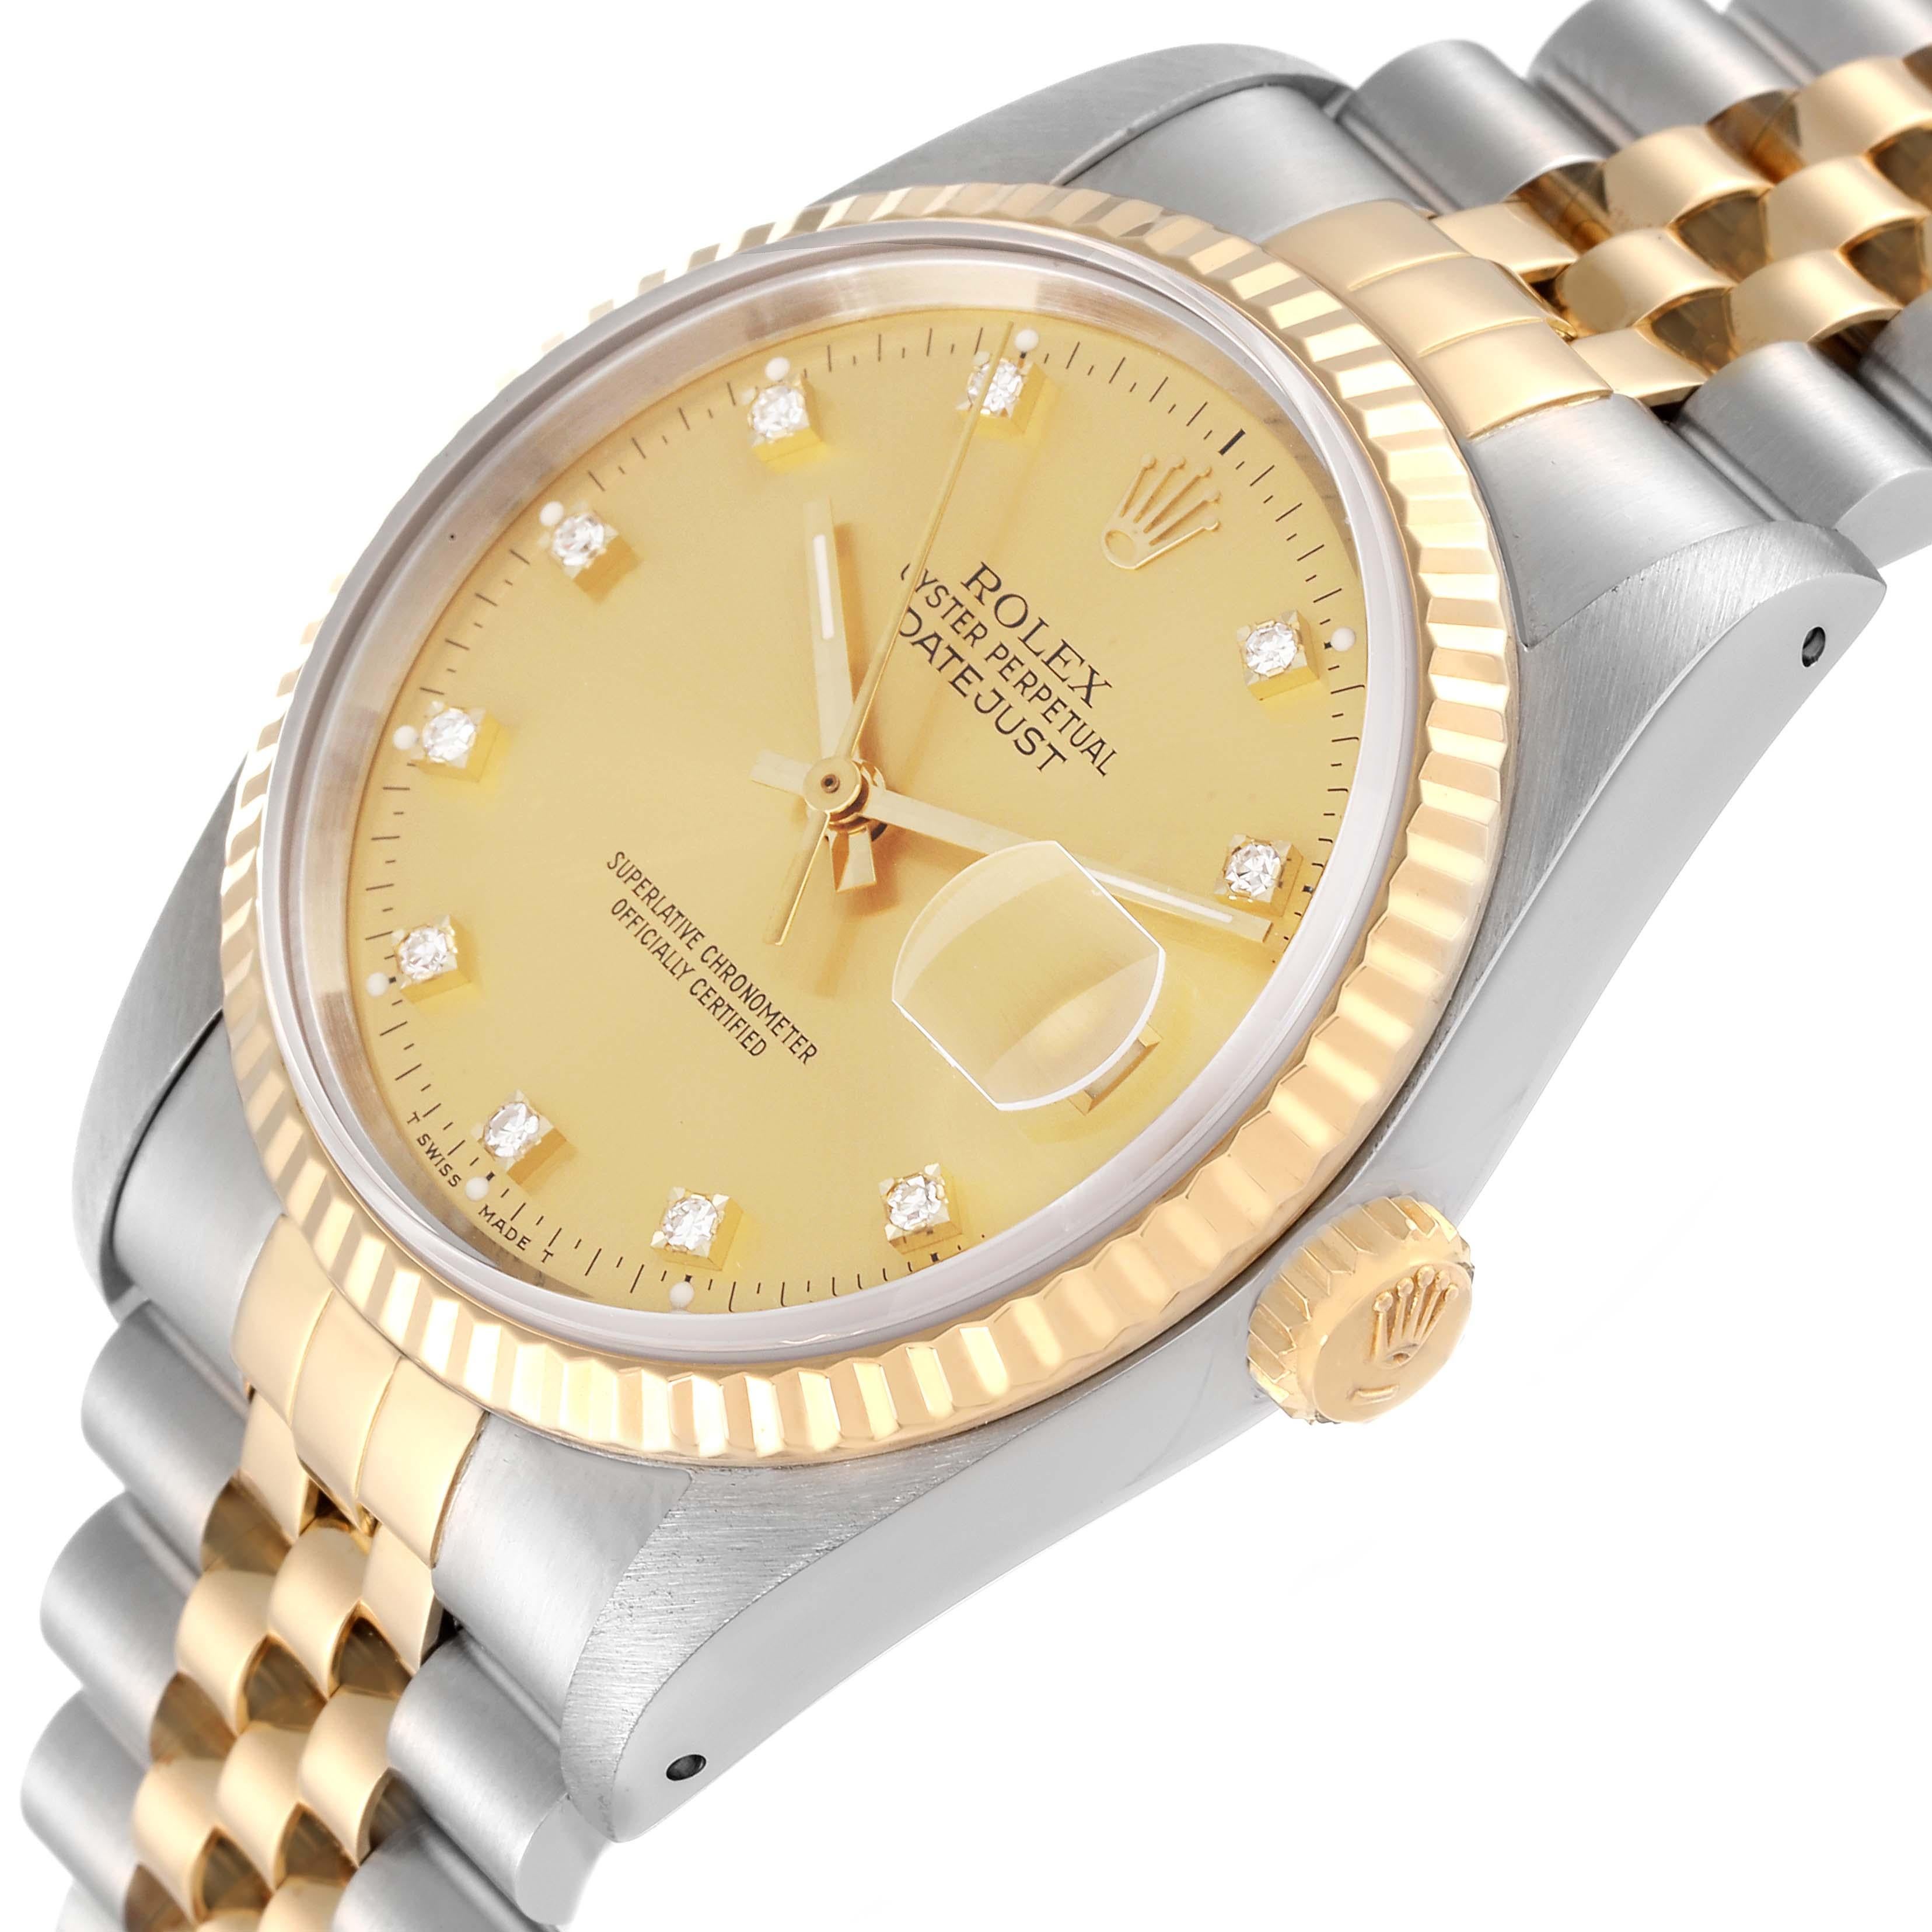 Rolex Datejust Champagne Diamond Dial Steel Yellow Gold Mens Watch 16233 For Sale 1